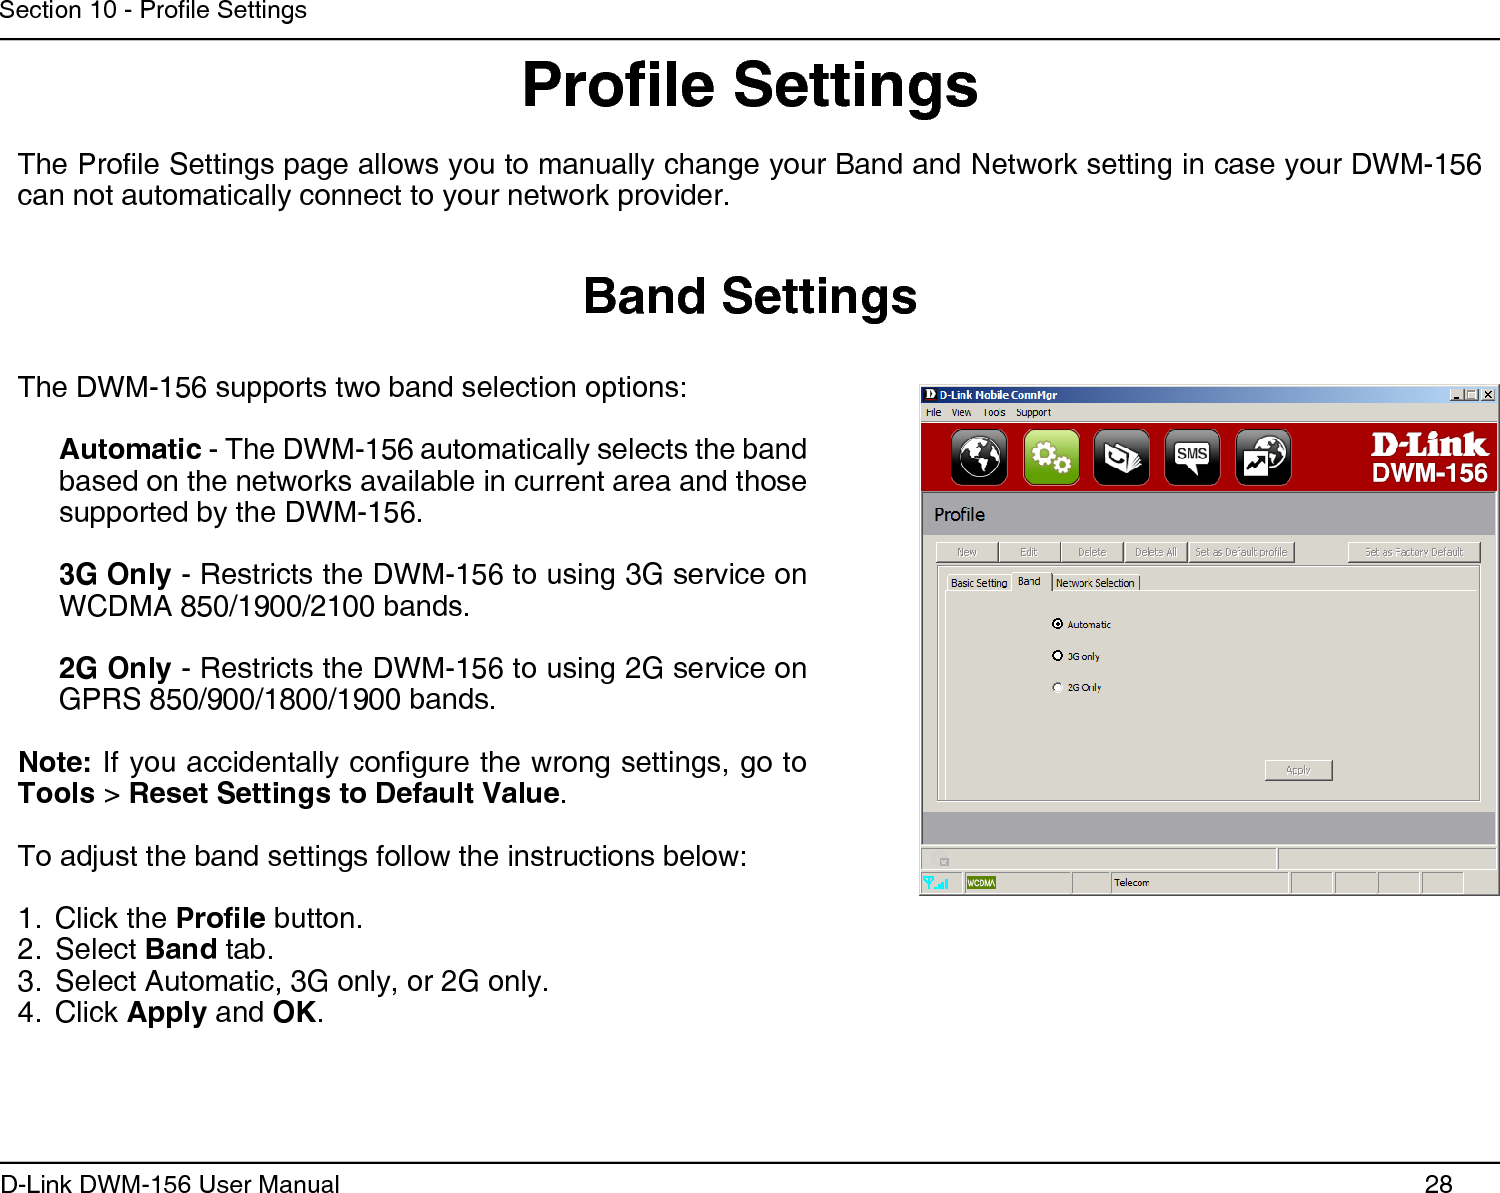 28D-Link DWM-156 User ManualSection 10 - Prole SettingsBand SettingsThe DWM-156 supports two band selection options:Automatic - The DWM-156 automatically selects the band based on the networks available in current area and those supported by the DWM-156.3G Only - Restricts the DWM-156 to using 3G service on WCDMA 850/1900/2100 bands.2G Only - Restricts the DWM-156 to using 2G service on GPRS 850/900/1800/1900 bands.Note: If you accidentally congure the wrong settings, go to Tools &gt; Reset Settings to Default Value. To adjust the band settings follow the instructions below:Click the 1.  Prole button.Select 2.  Band tab.Select Automatic, 3G only, or 2G only.3. Click 4.  Apply and OK.Prole SettingsThe Prole Settings page allows you to manually change your Band and Network setting in case your DWM-156 can not automatically connect to your network provider.